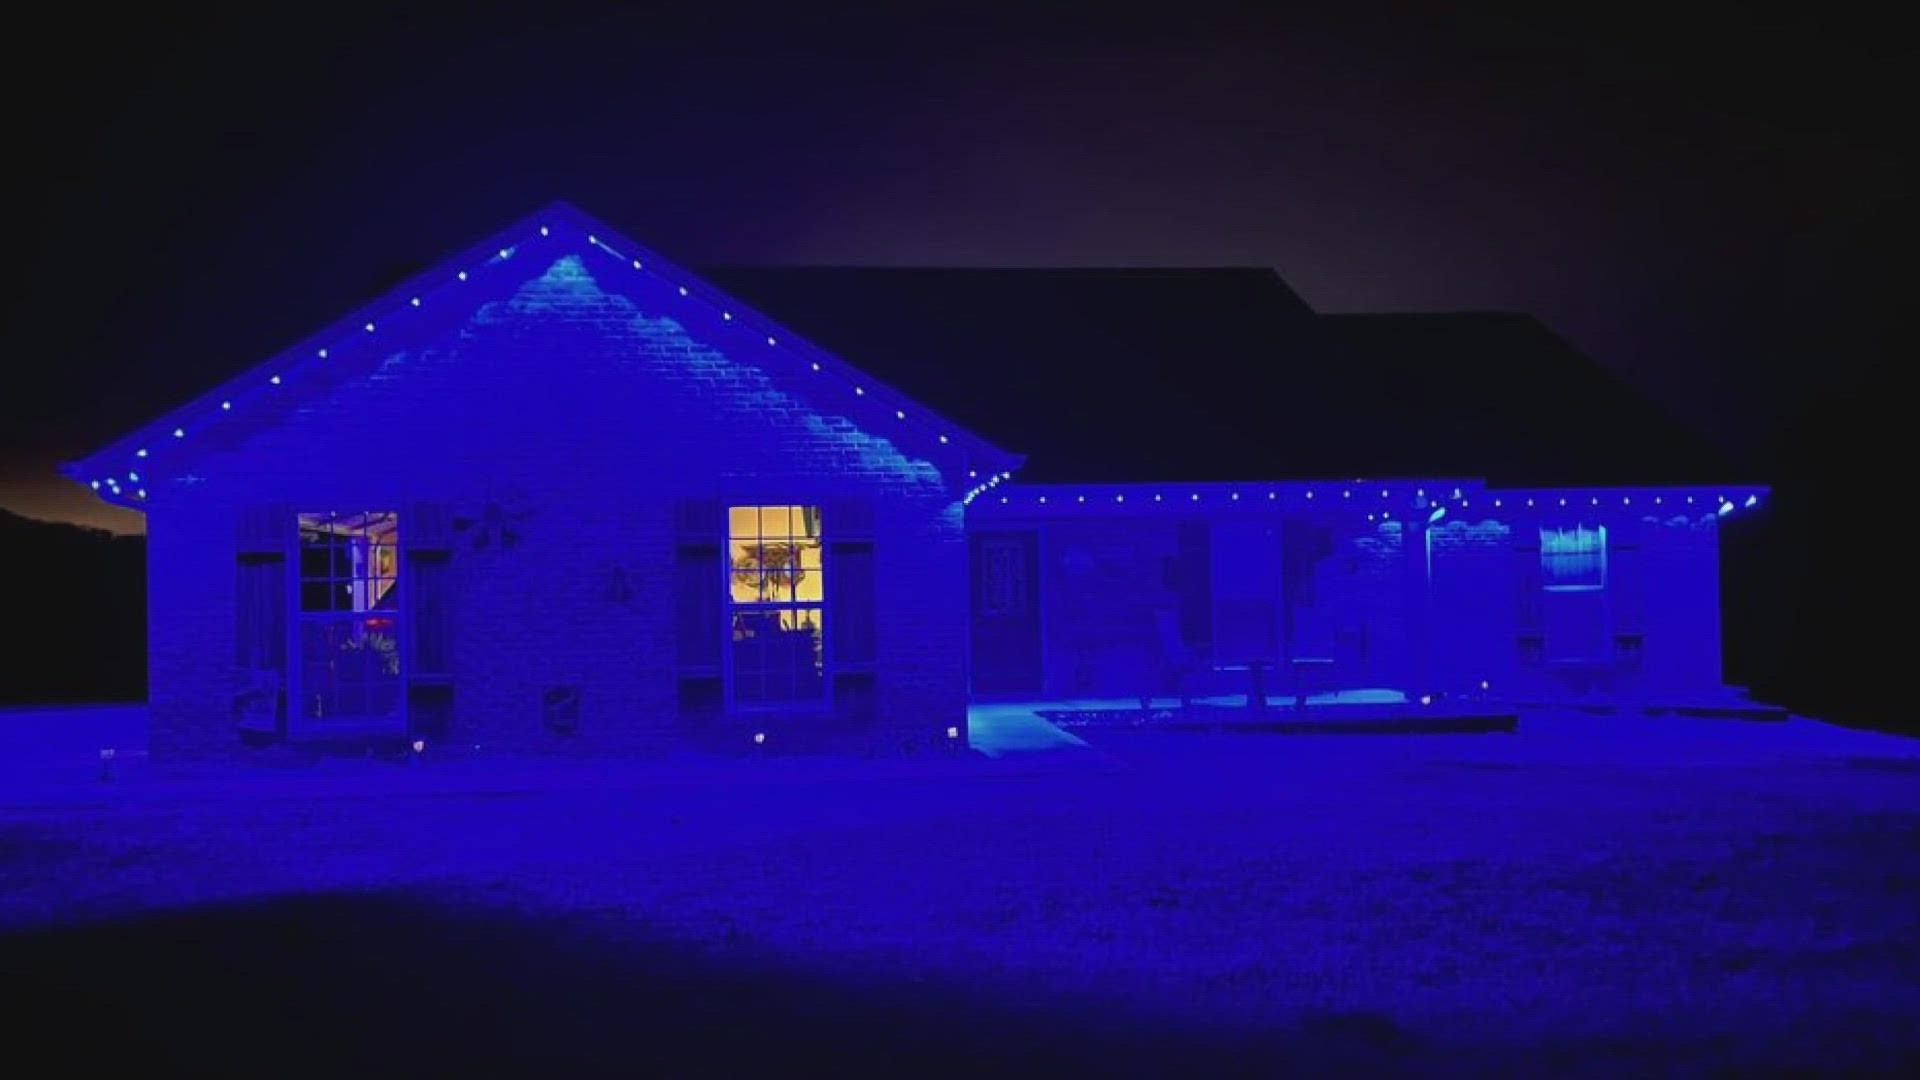 Just within an hour of hearing the news of the death of Deputy Greg McCowan, Dan turned his house light from white to blue.